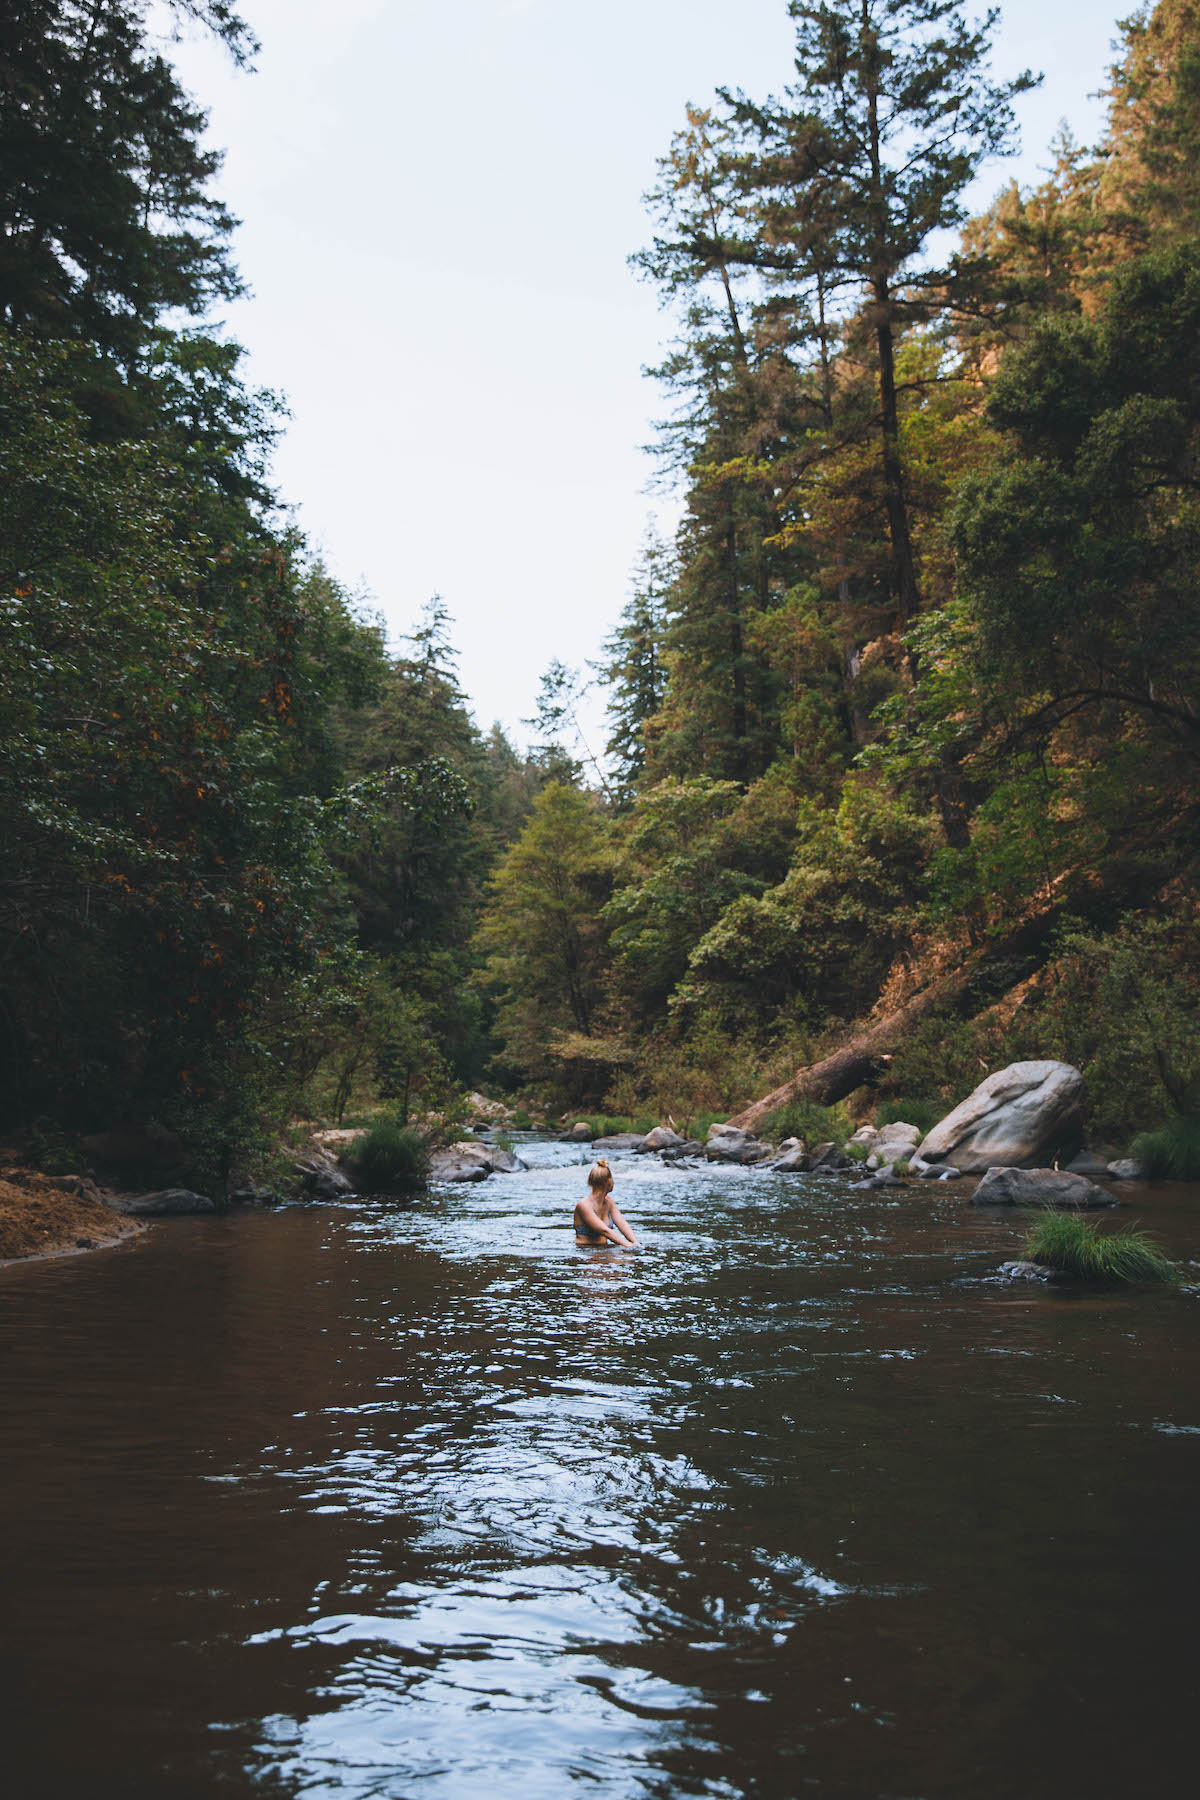 Young woman in a river taking in the scenic views